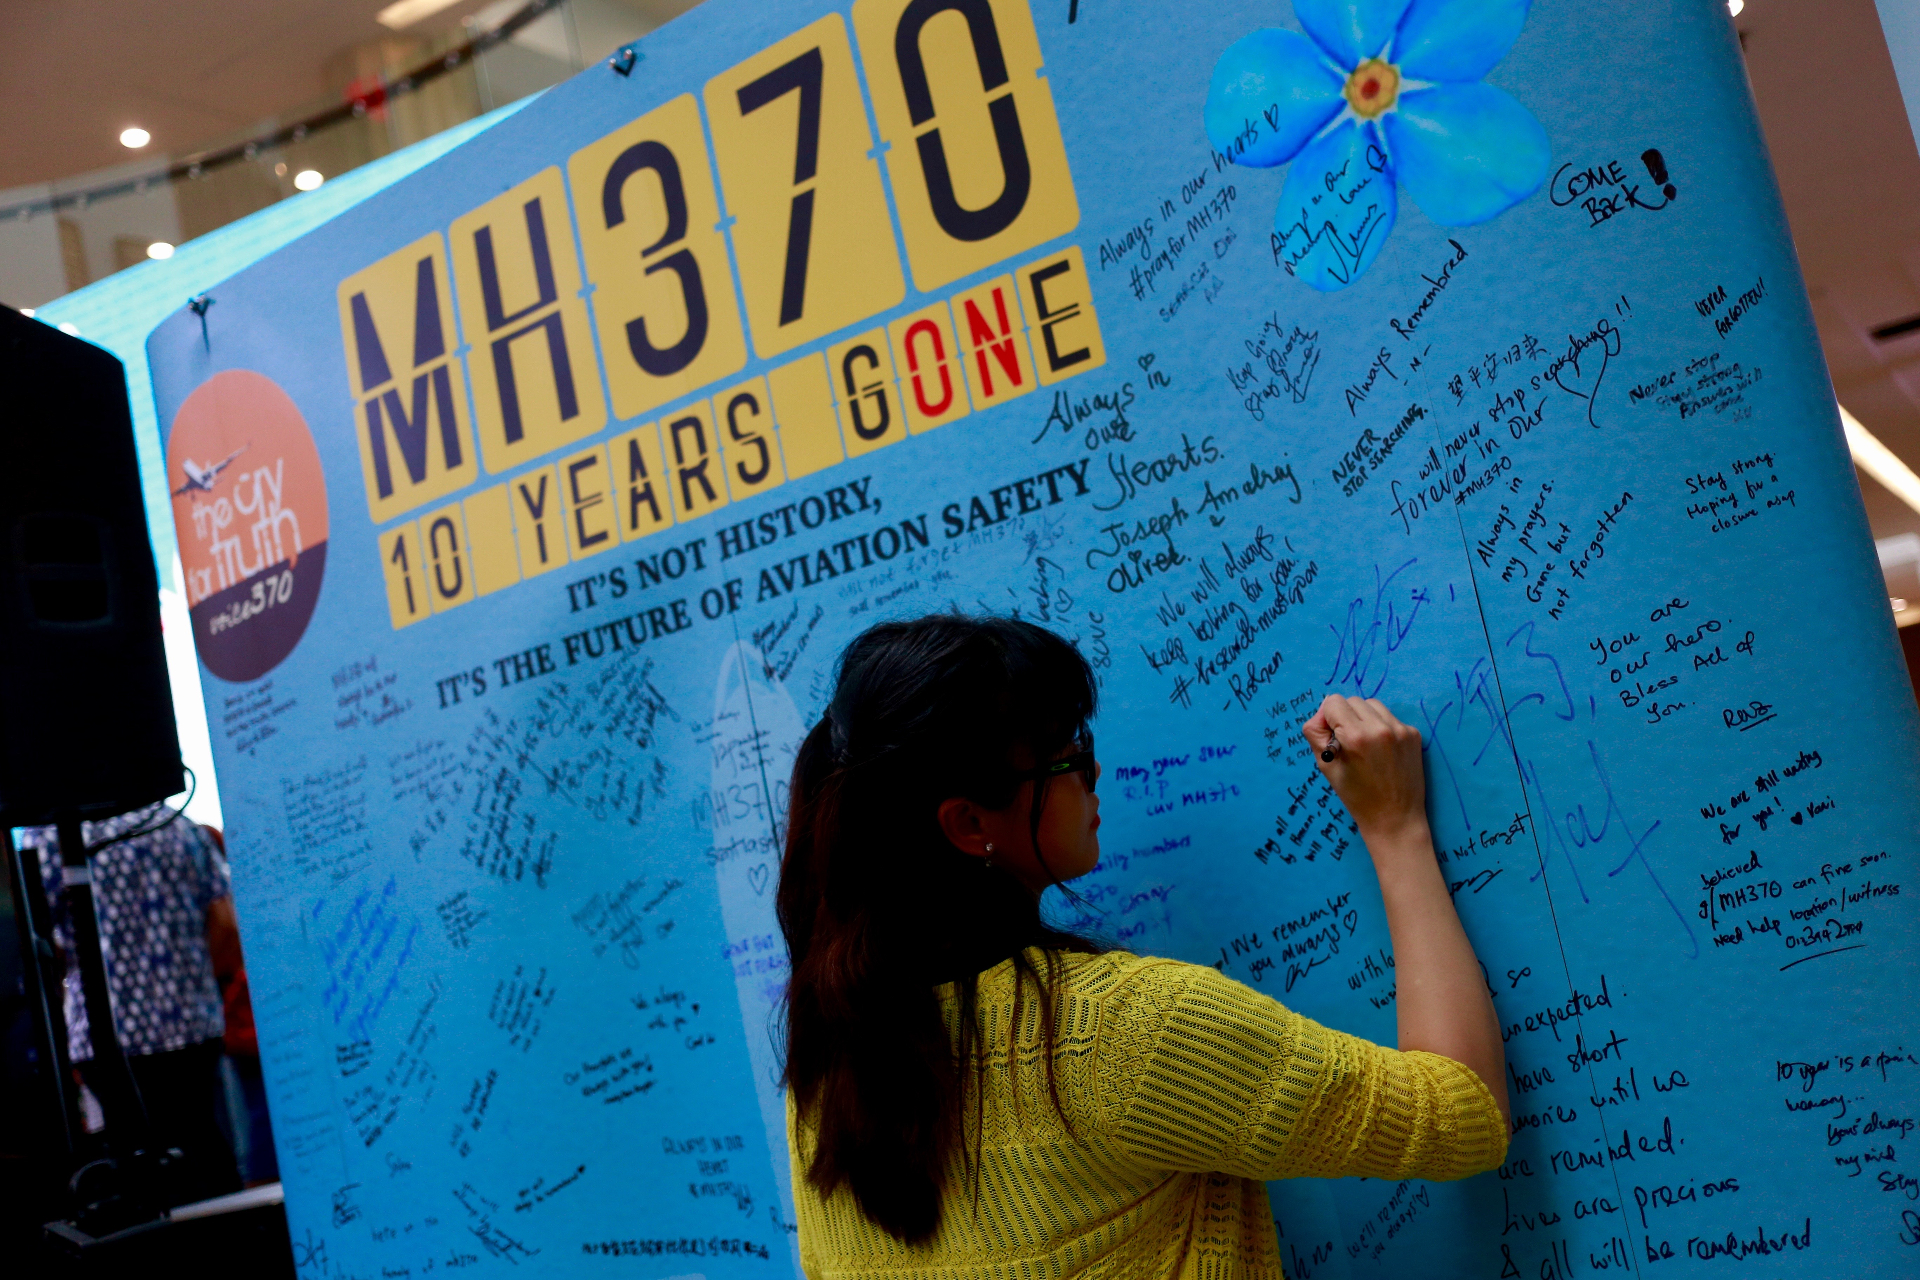 The ill-fated Malaysian flight took off in 2014